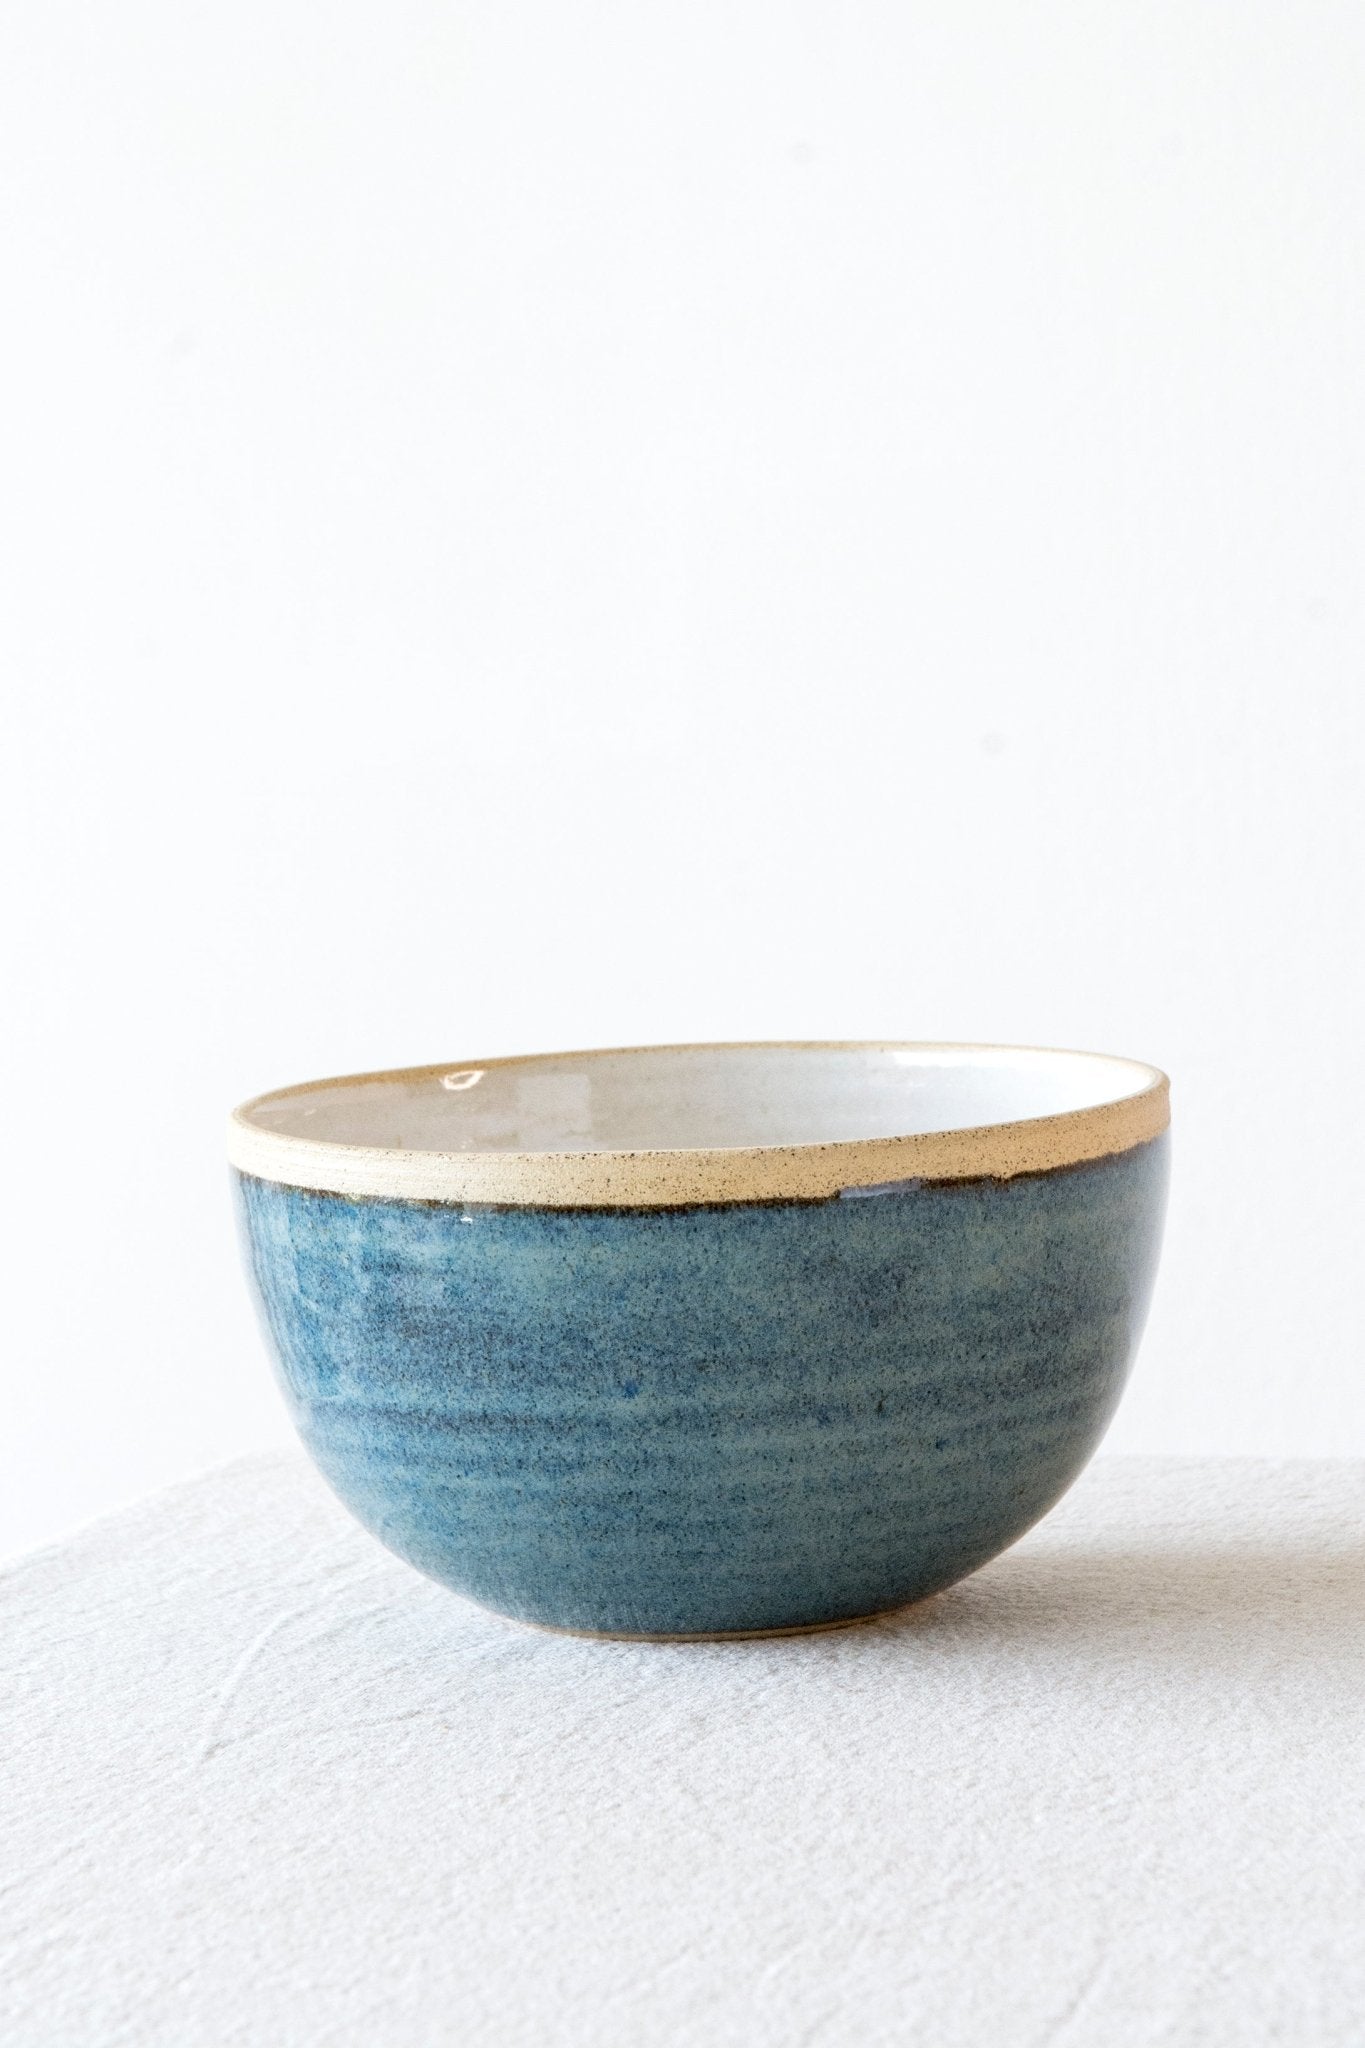 Ceramic Blue & White Bowl - Mad About Pottery- Bowl